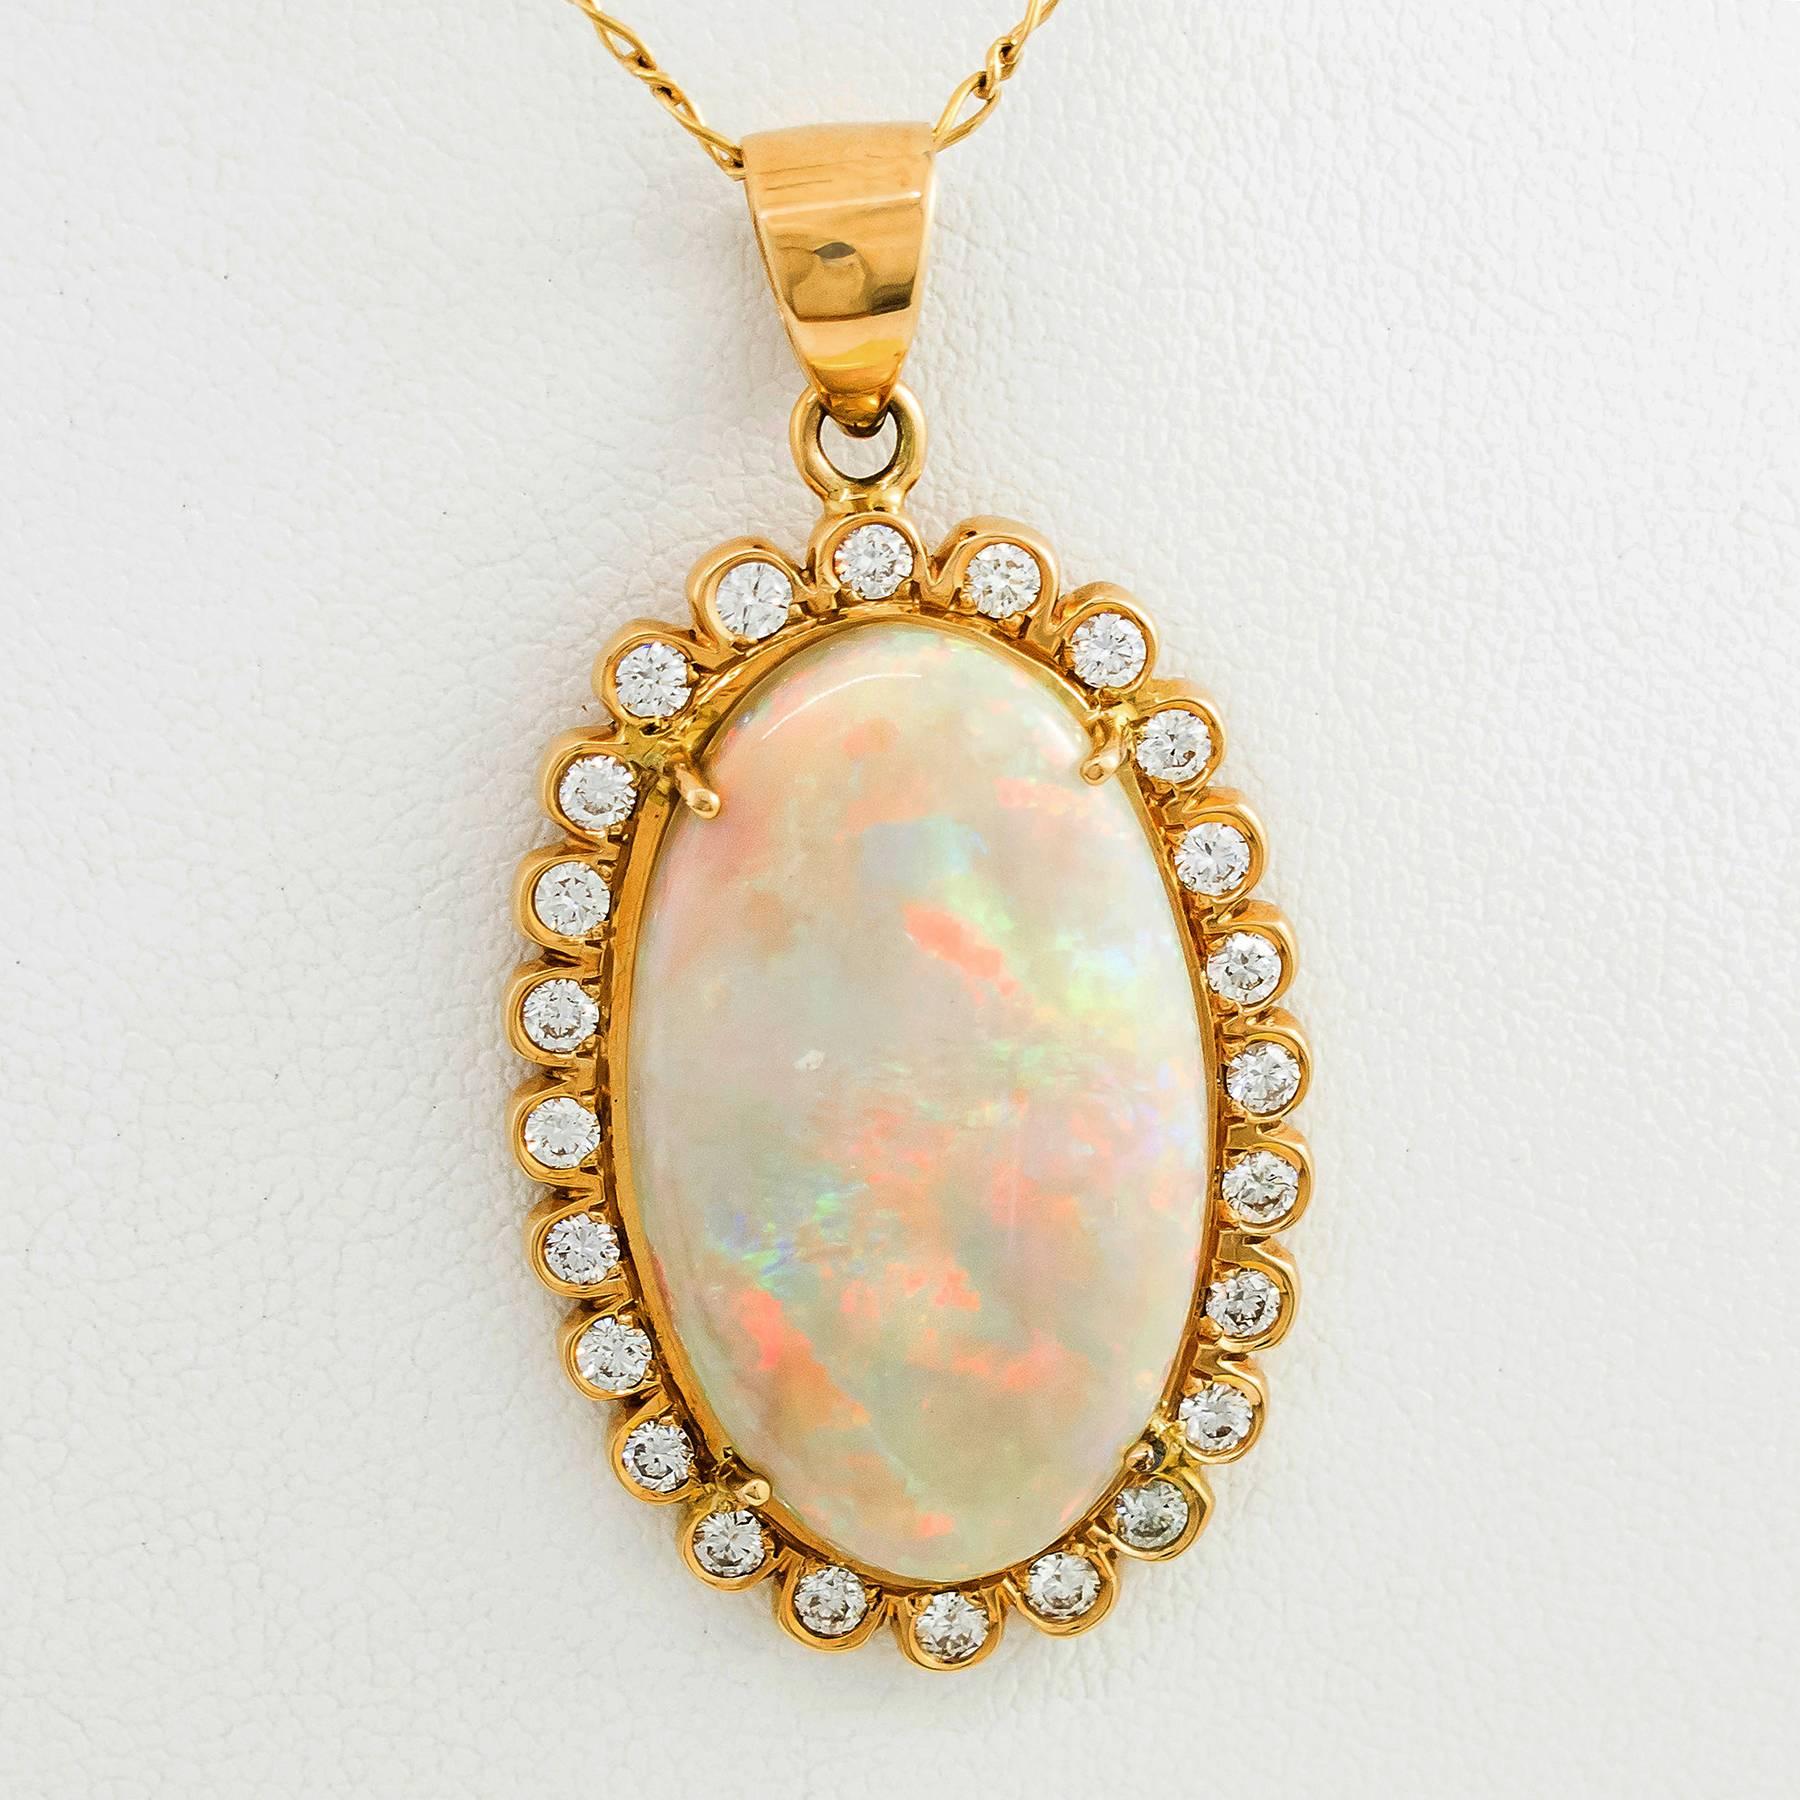 A spectacular Australian Crystal Opal, Diamond and Gold Necklace. This fine cabochon cut oval Opal pendant displays flashing colors of vibrant  reds, greens and blues on a white background.  The Opal is set in a surround of 24 round, brilliant cut